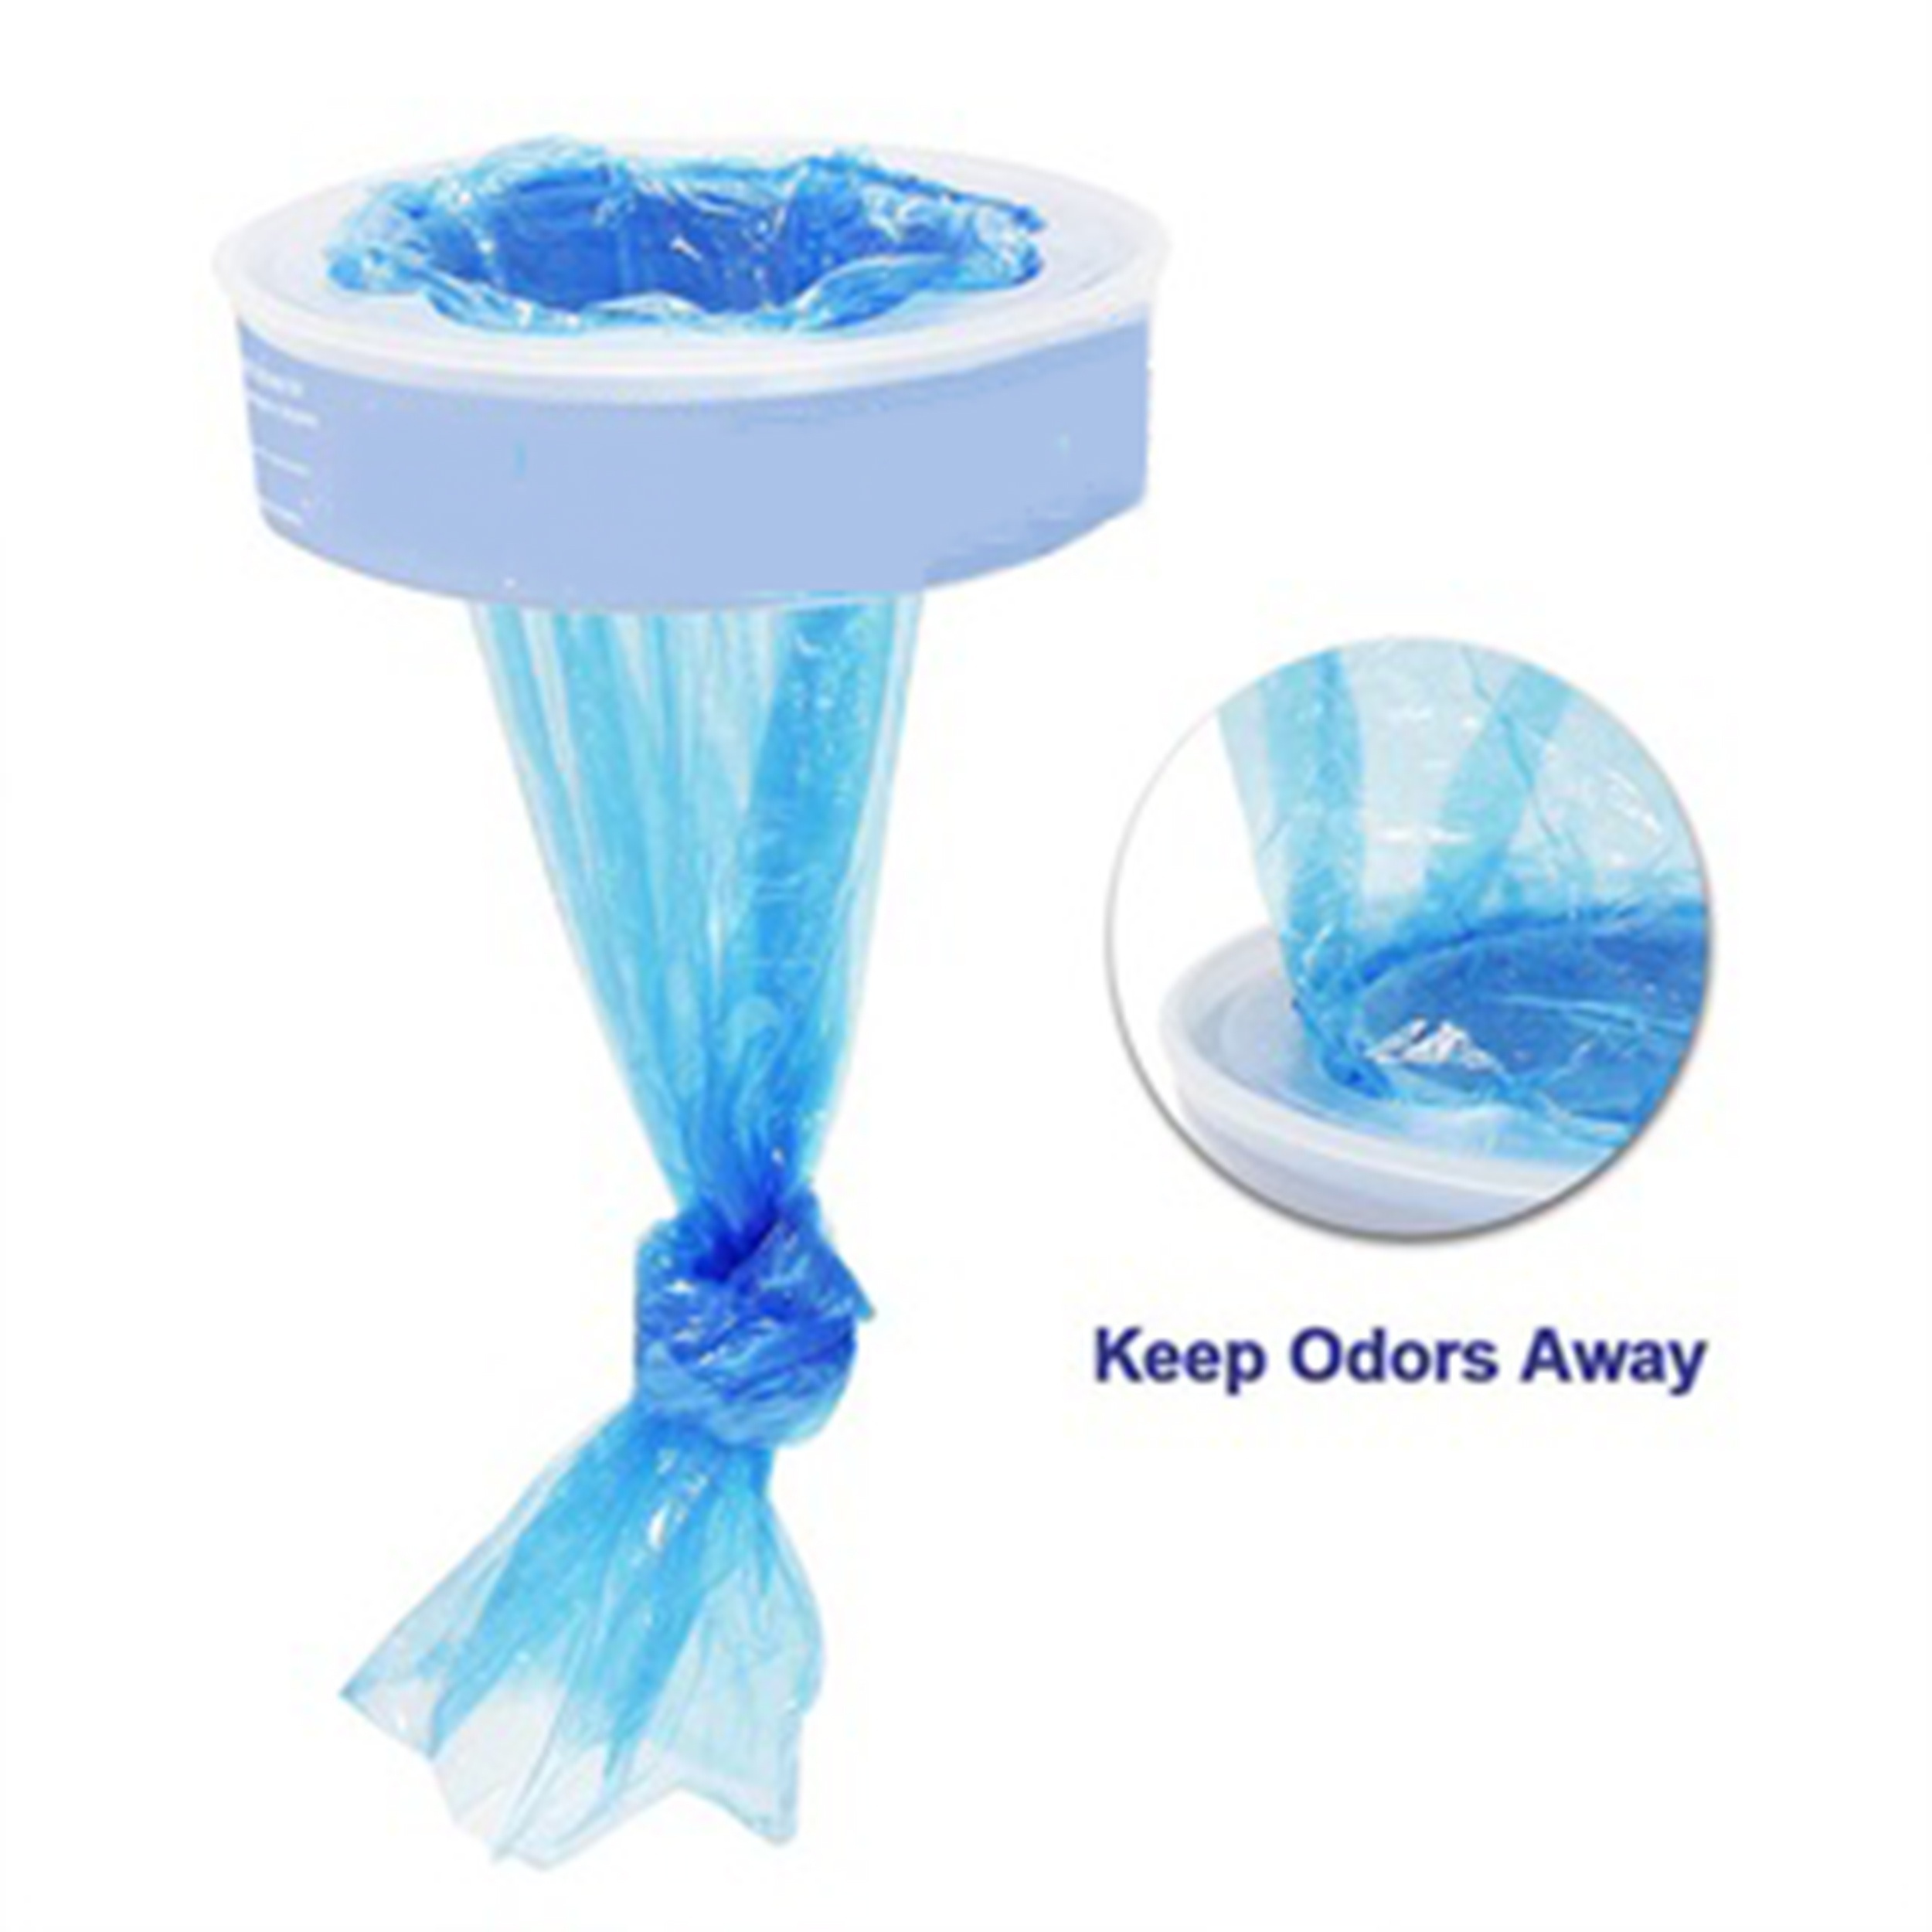 Bady Diaper Refill Bags for Twist & click For Sangenic Diaper Pails  Degradable Garbage Plastic Trash Waste Replacement Bag